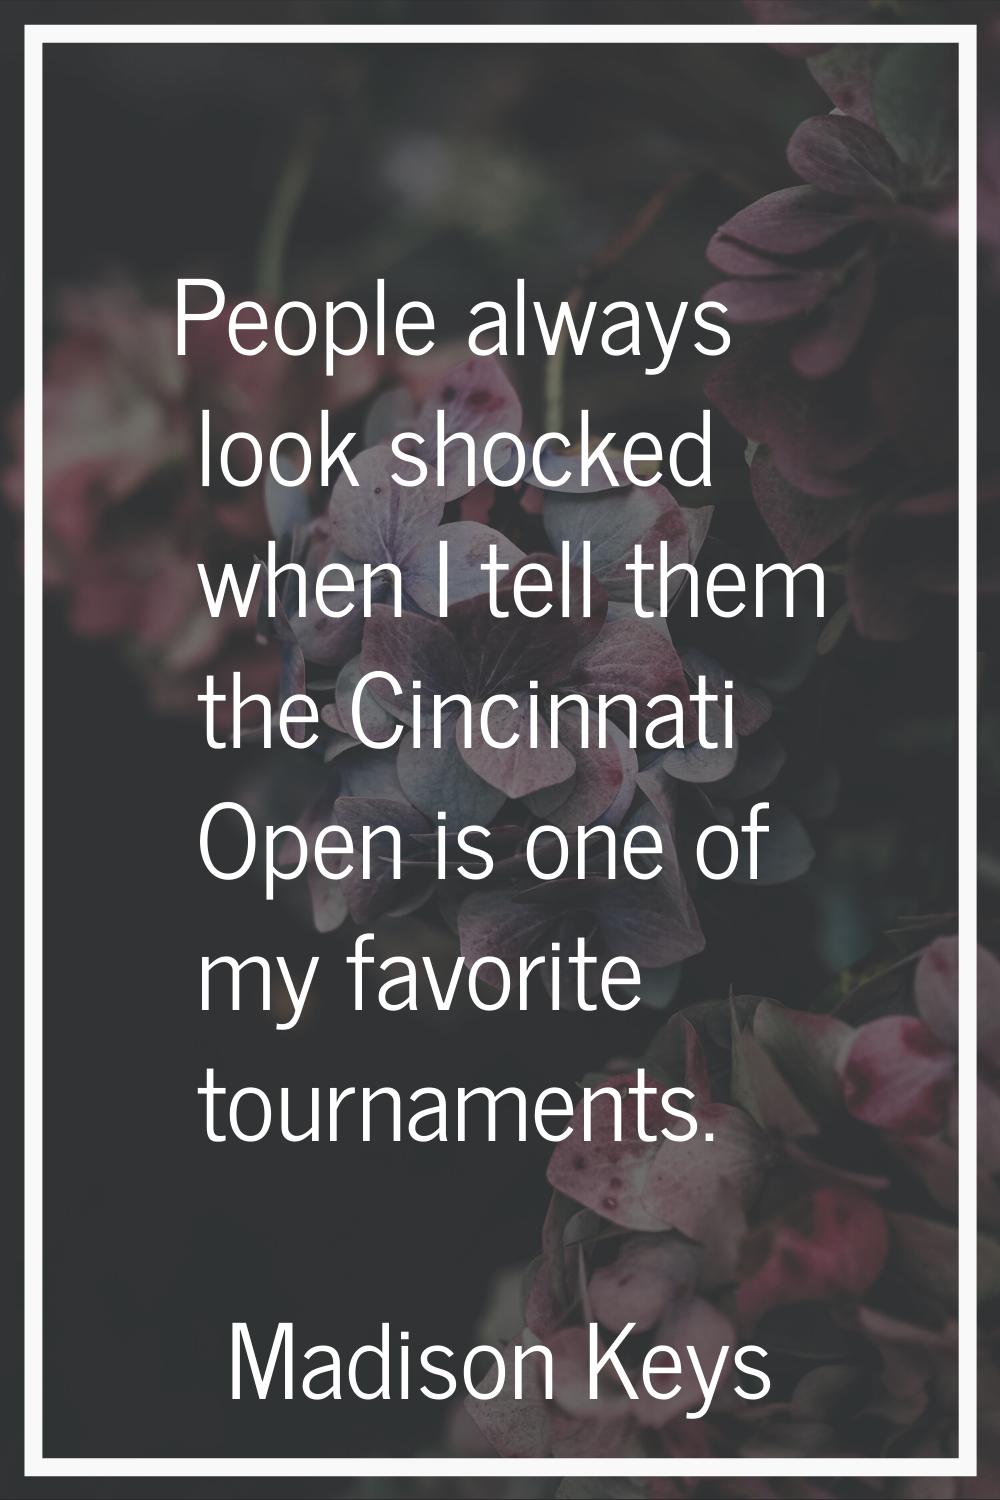 People always look shocked when I tell them the Cincinnati Open is one of my favorite tournaments.